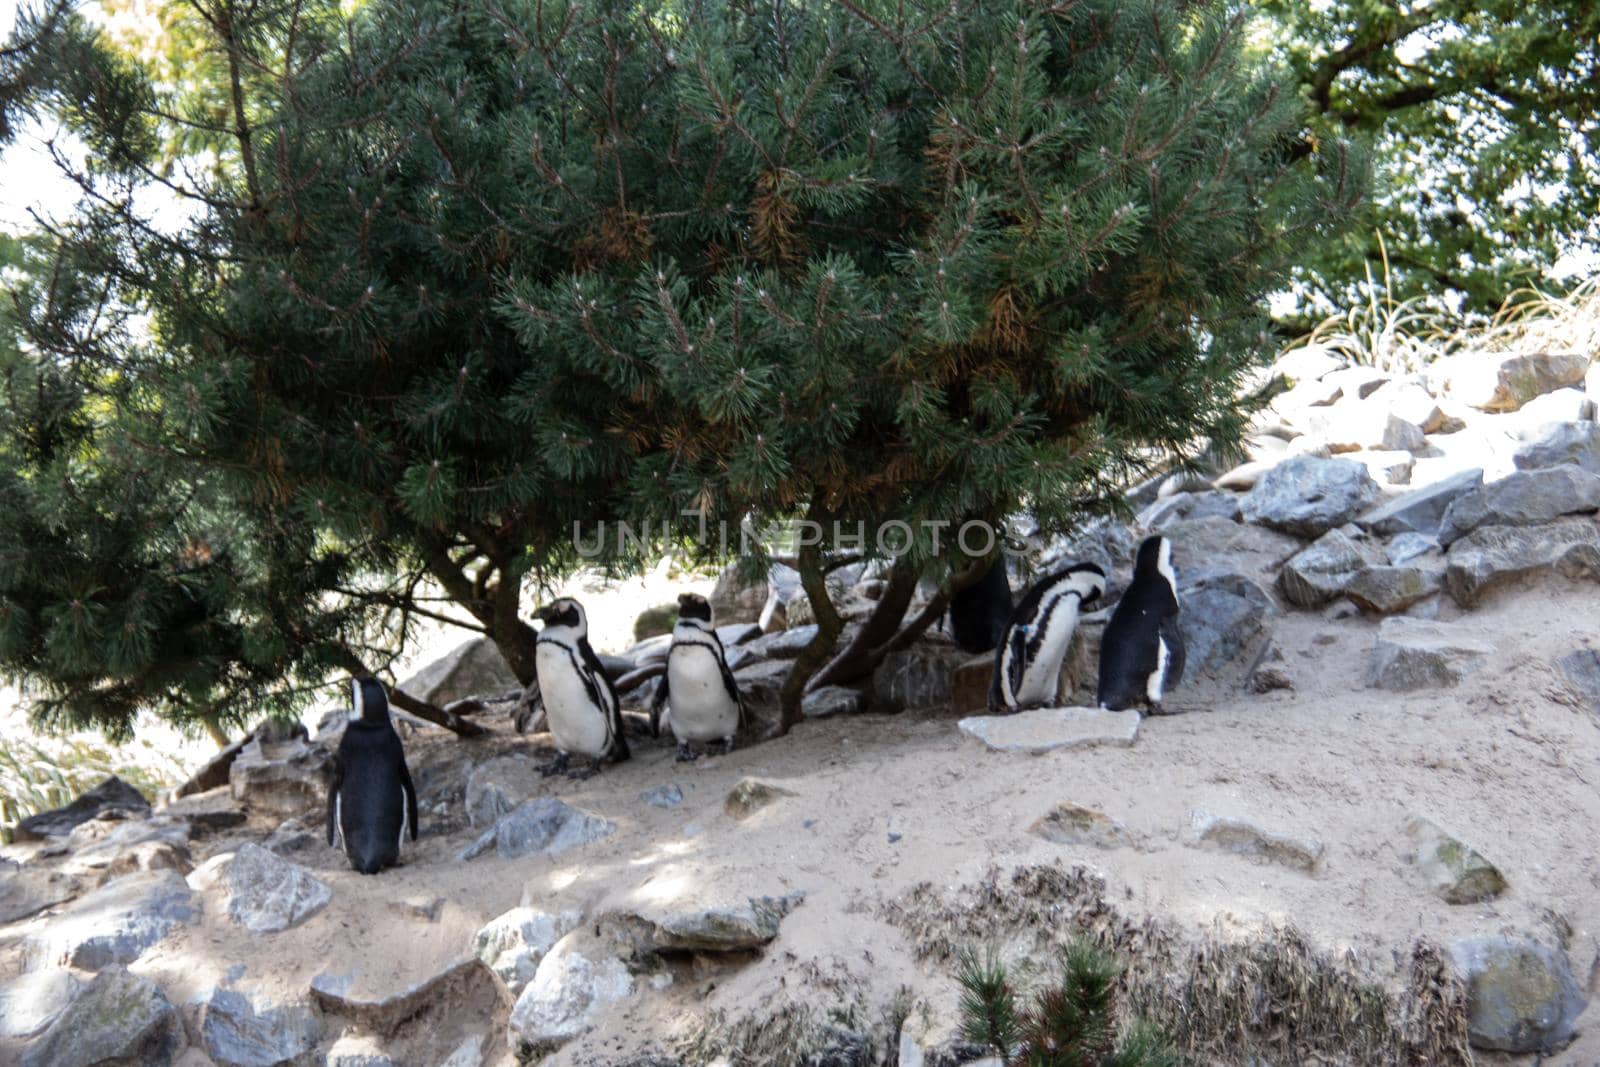 Penguins in a colony by Dr-Lange